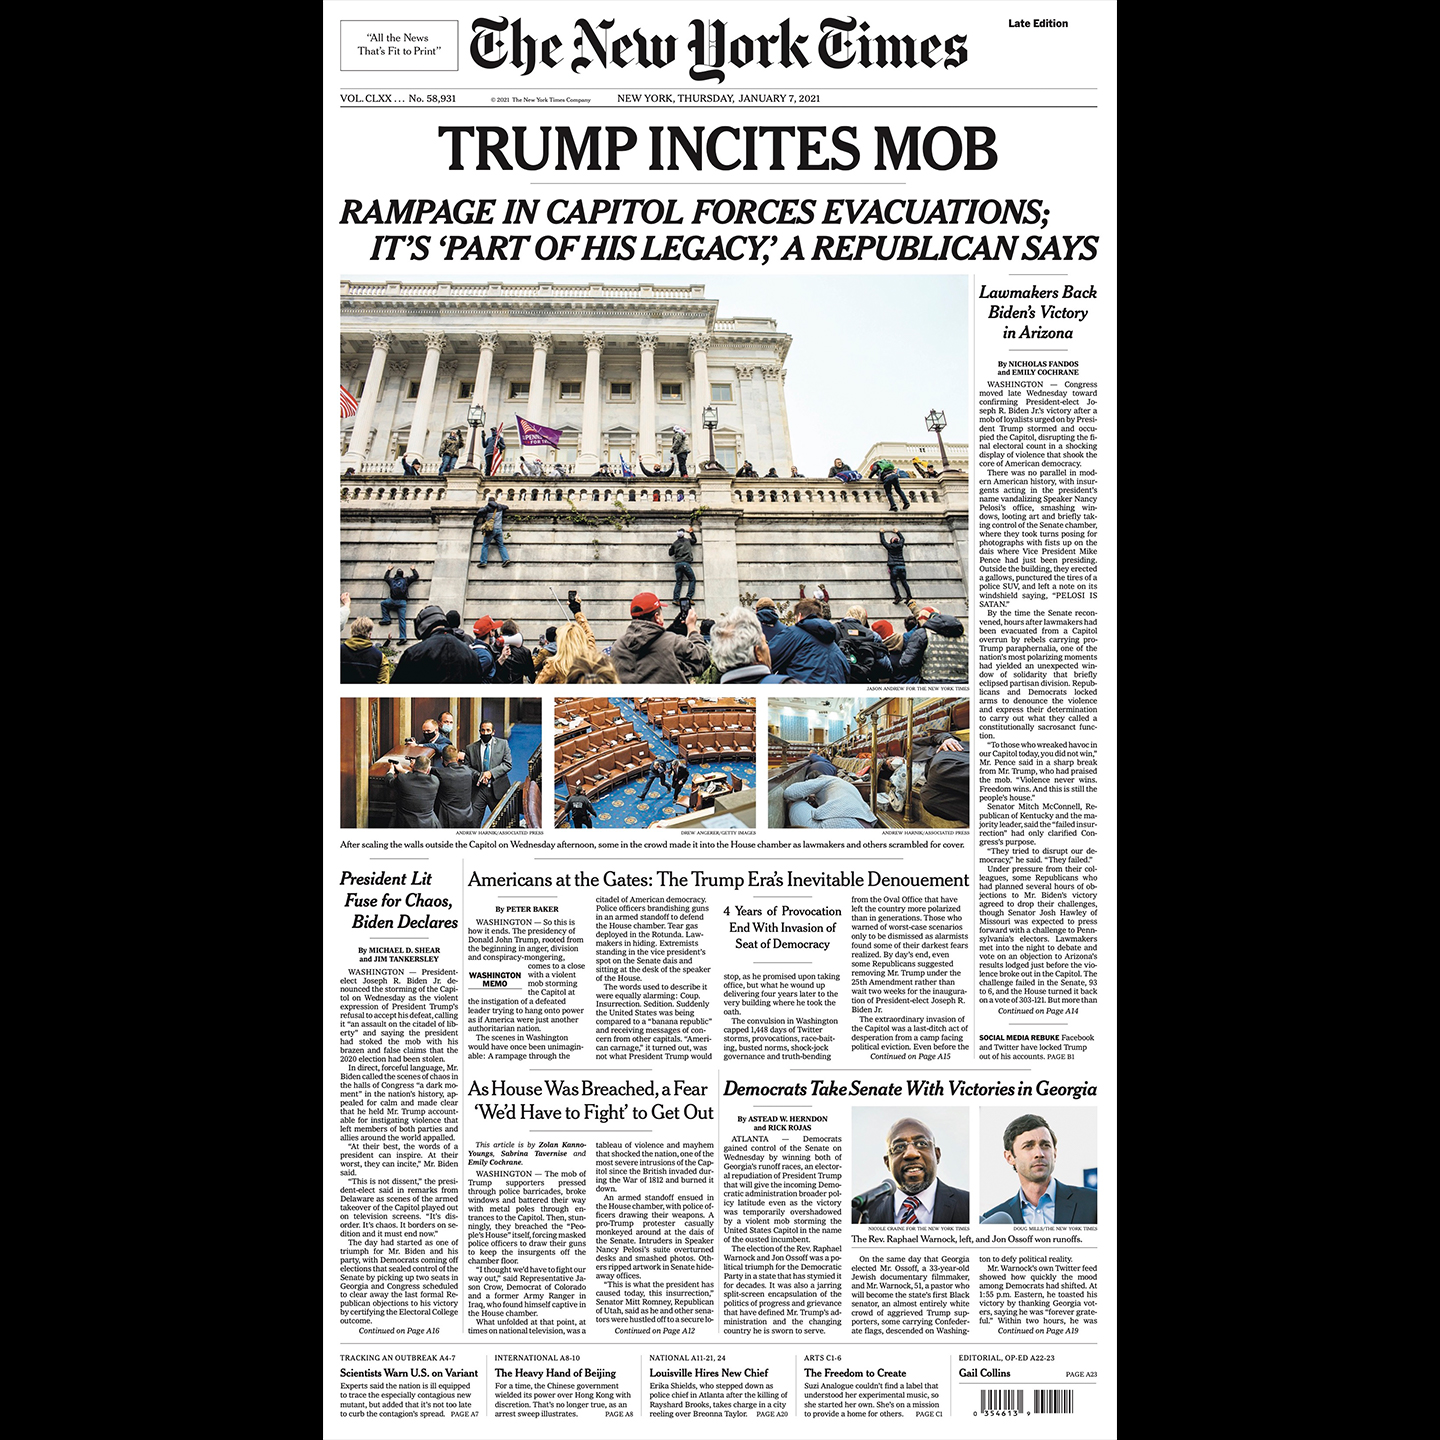 The New York Times on Twitter: "The front of The New York Times Jan. 7, 2021 (late edition). https://t.co/enmoNs55vm" / Twitter